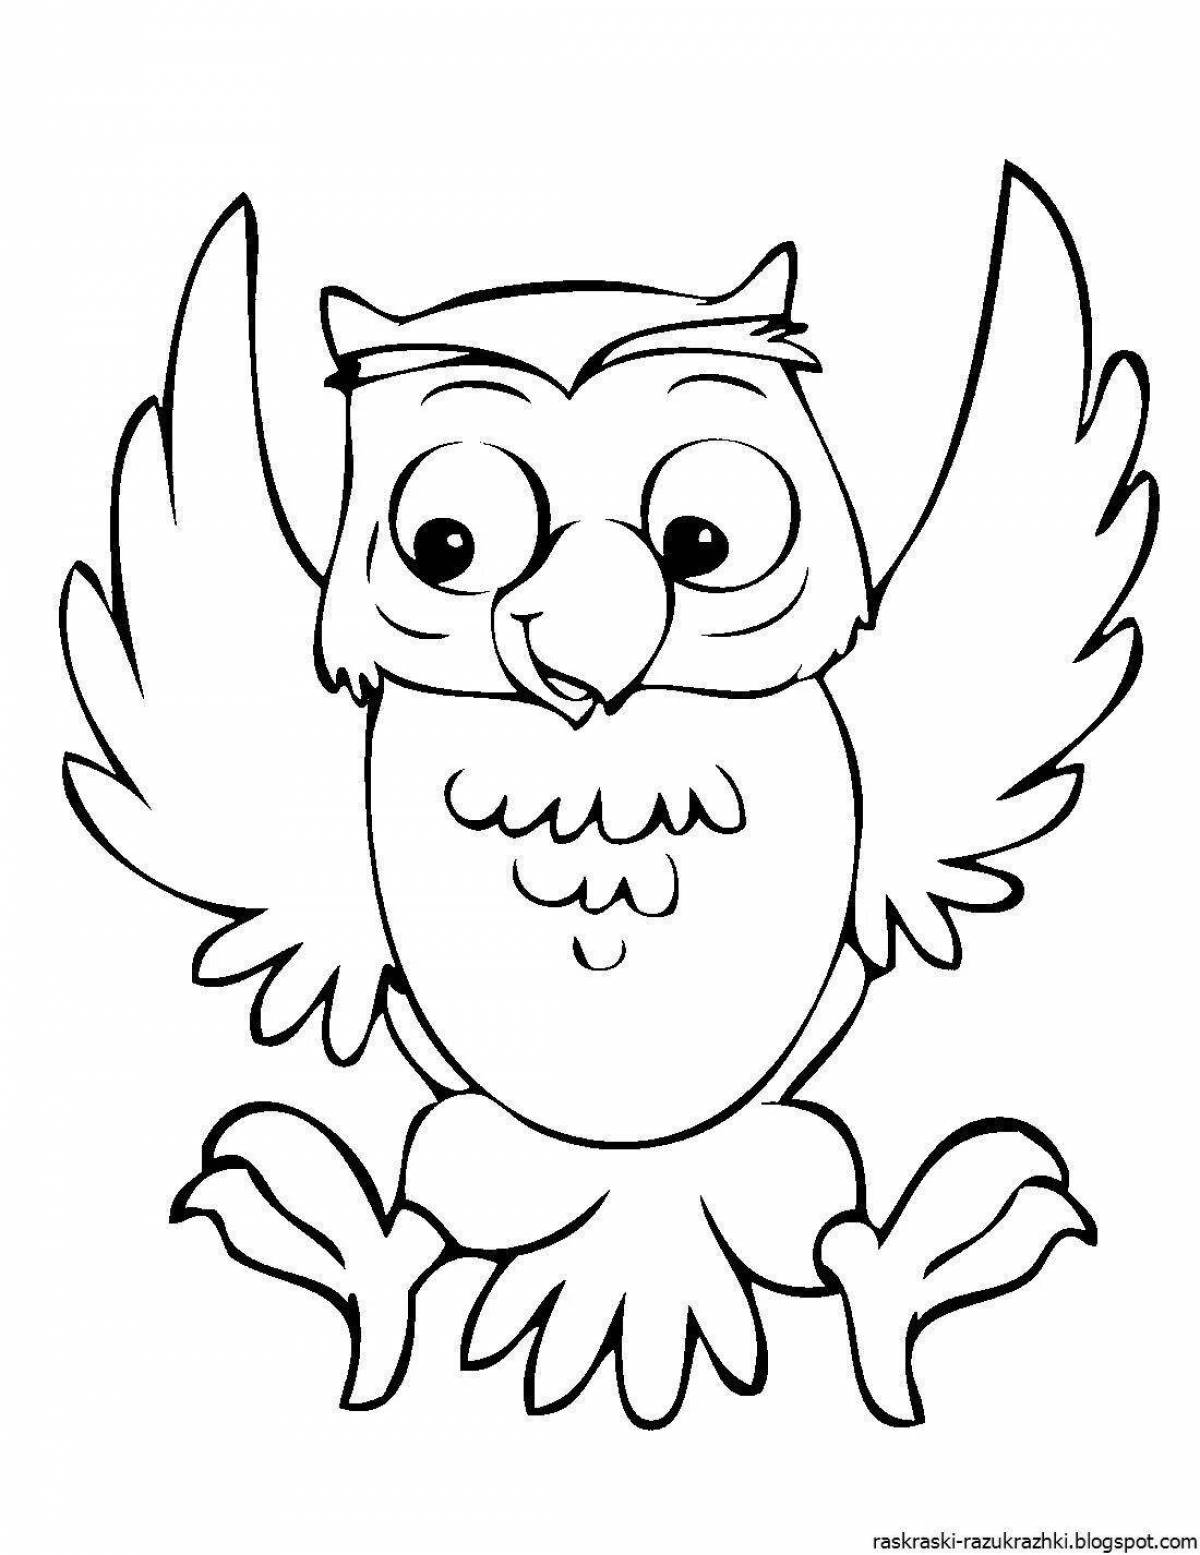 Fun owlet coloring book for kids